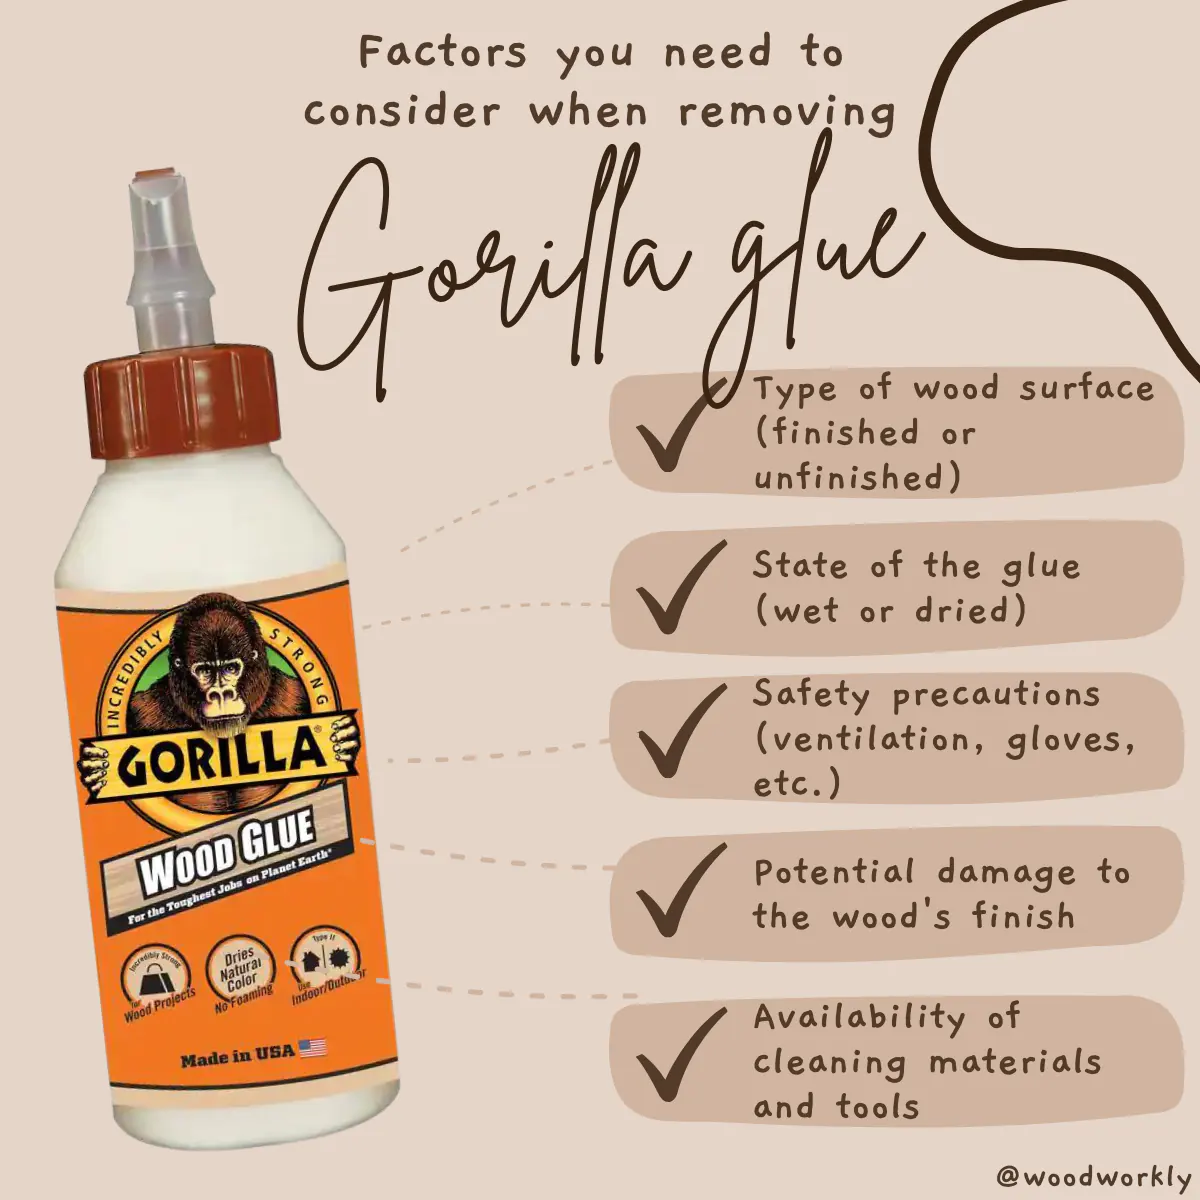 Factors you need to consider when removing Gorilla glue from wood